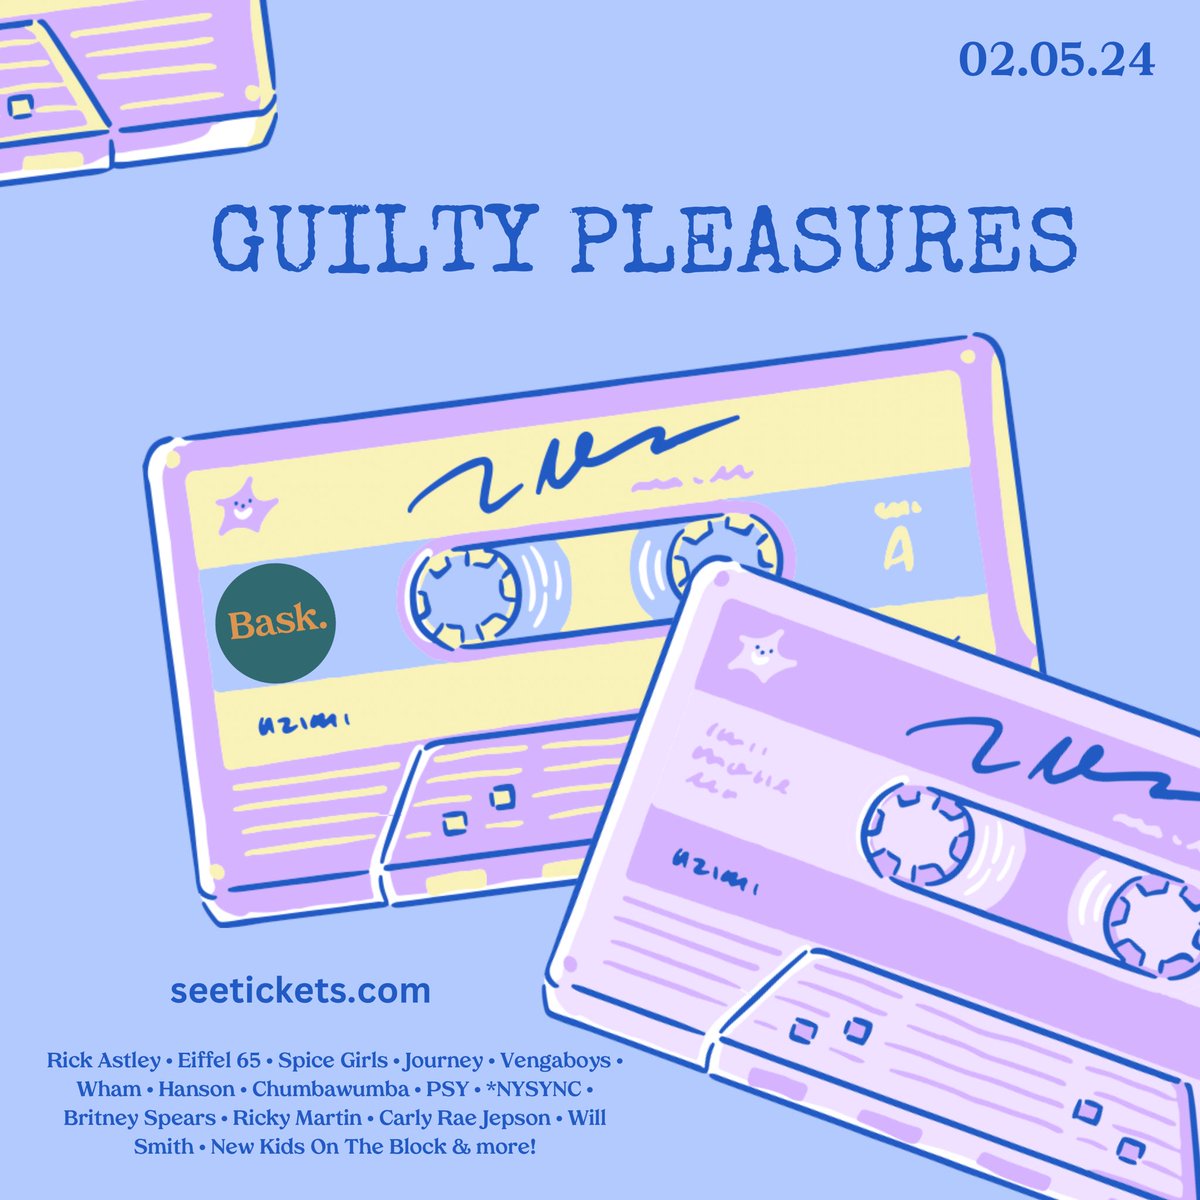 A Thursday special on the way next week. Guilty Pleasures : Rick Astley • Eiffel 65 • Spice Girls • Journey • Vengaboys • Wham • Hanson • Chumbawumba • PSY • *NYSYNC • Britney Spears • Ricky Martin • Carly Rae Jepson • Will Smith & more! seetickets.com/event/guilty-p…